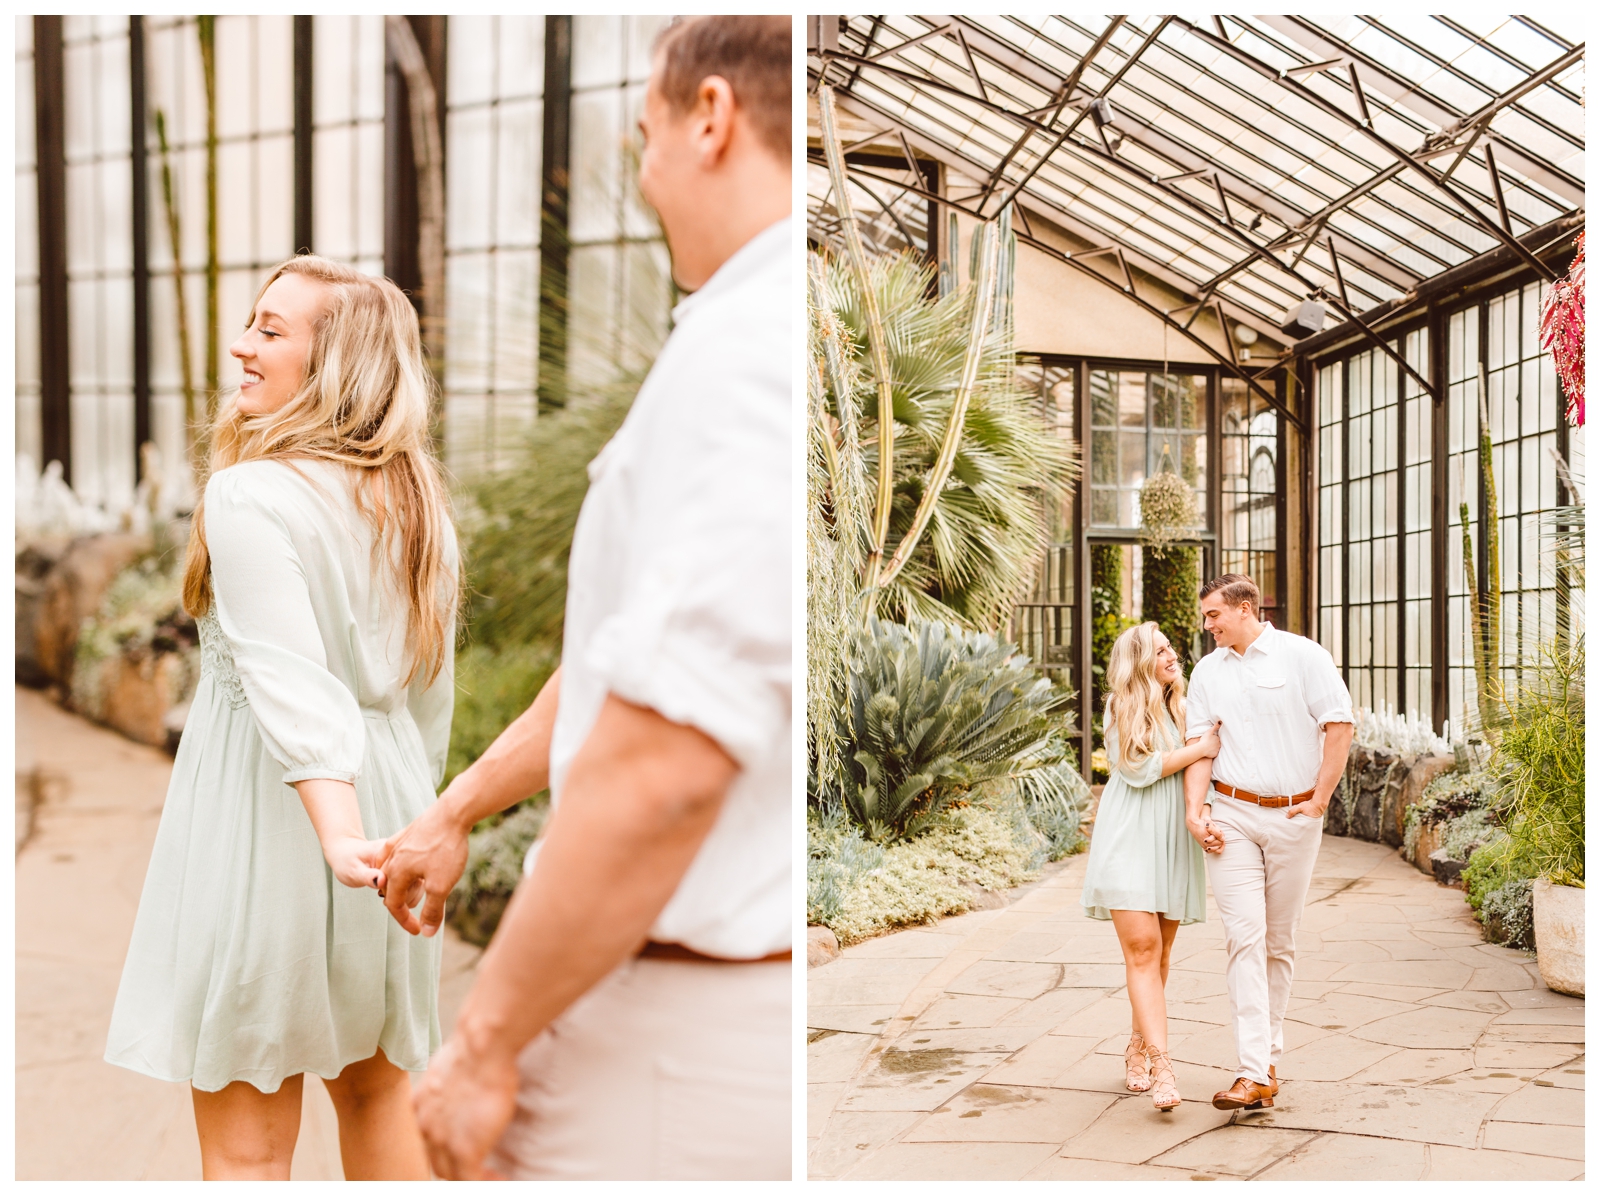 Romantic Greenhouse Engagement Session Inspo - Longwood Gardens, PA - Brooke Michelle Photography